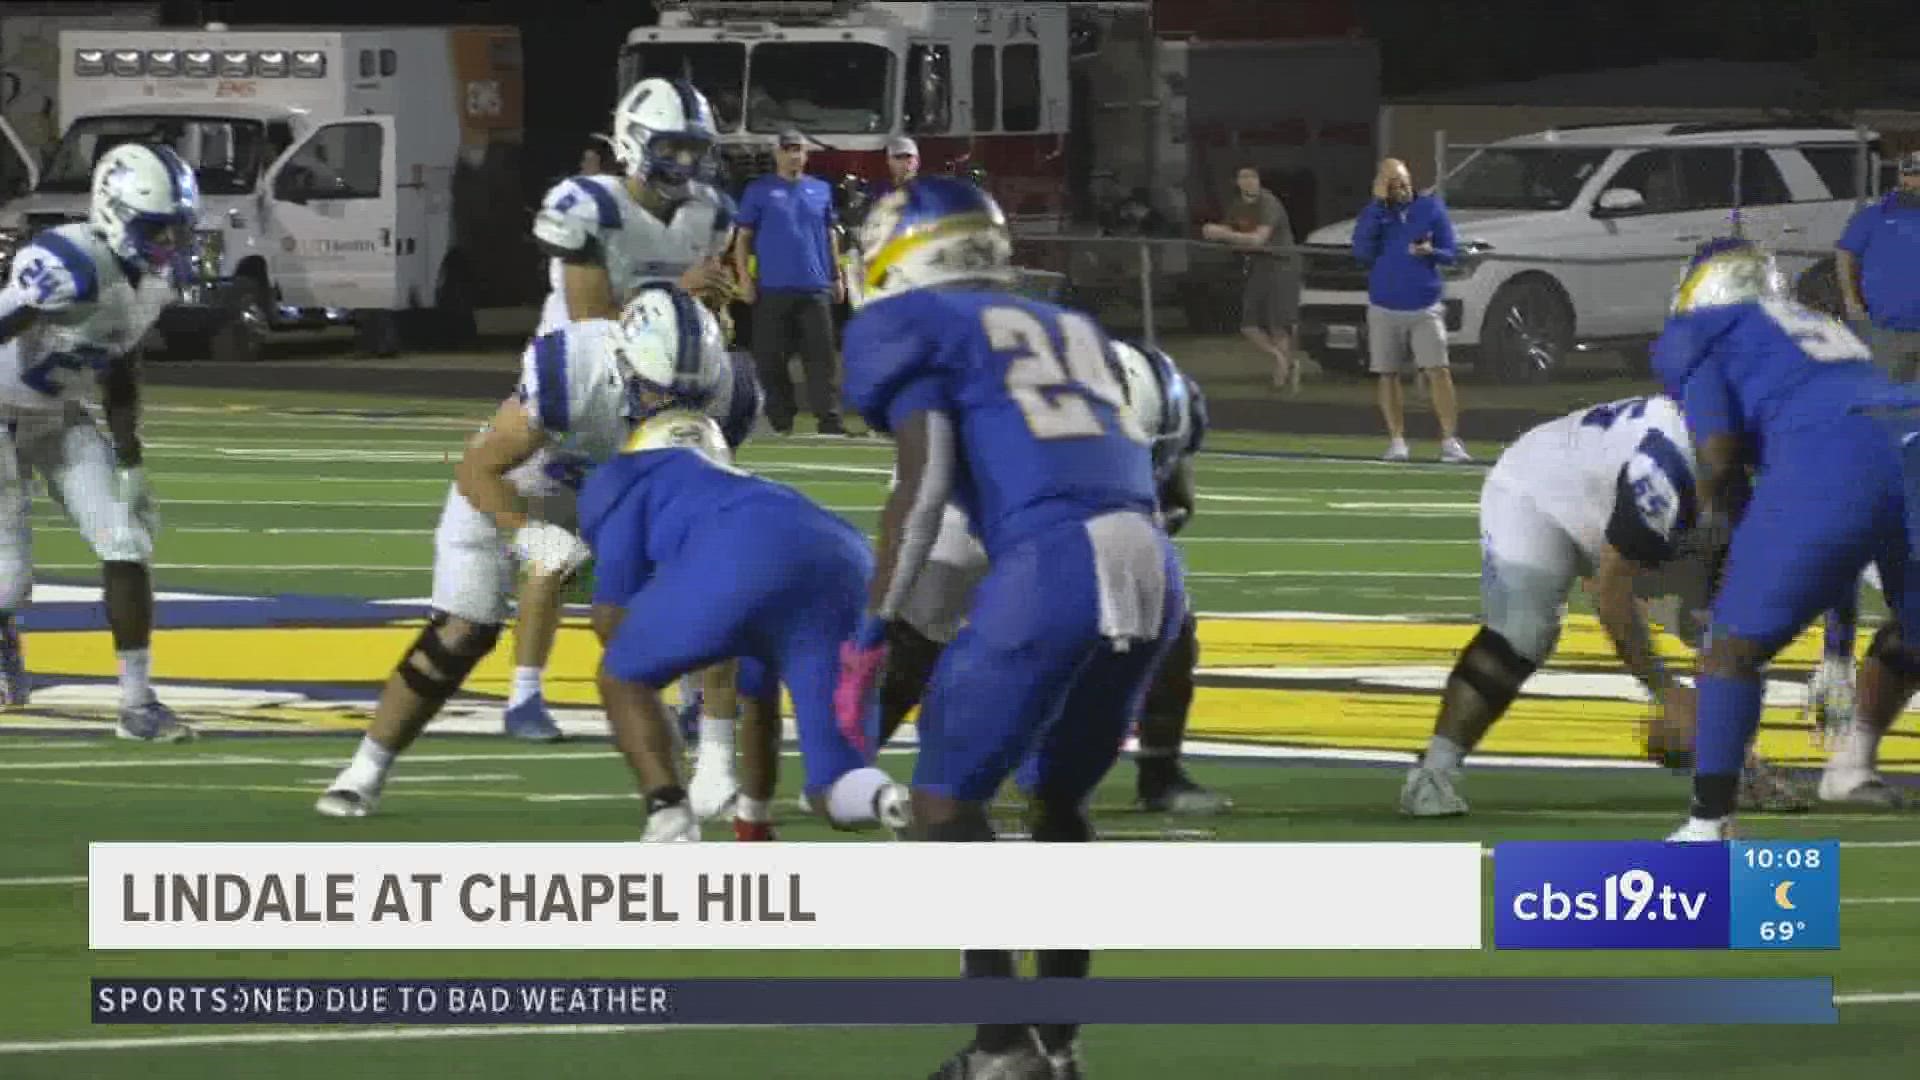 For more East Texas high school football highlights, visit CBS19.tv/Under-The-Lights.